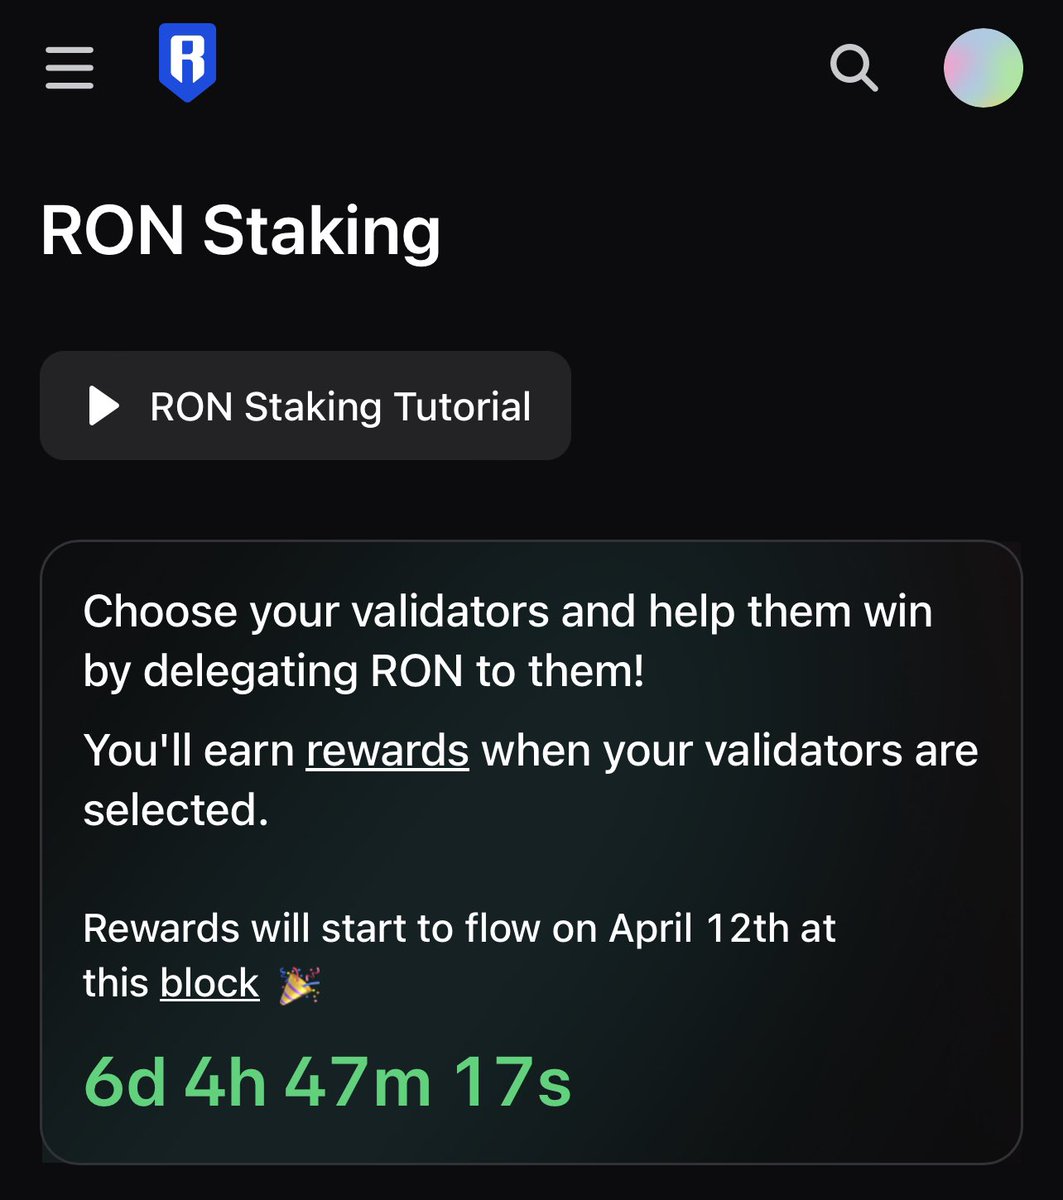 $RON Validator Update 👺 ✅ 250k $RON secured ✅ Node Setup ✅ Operations 📌 Just working on the feasibility studies to better serve our Community. Thank you for all those who expressed their support to delegate. 🤝